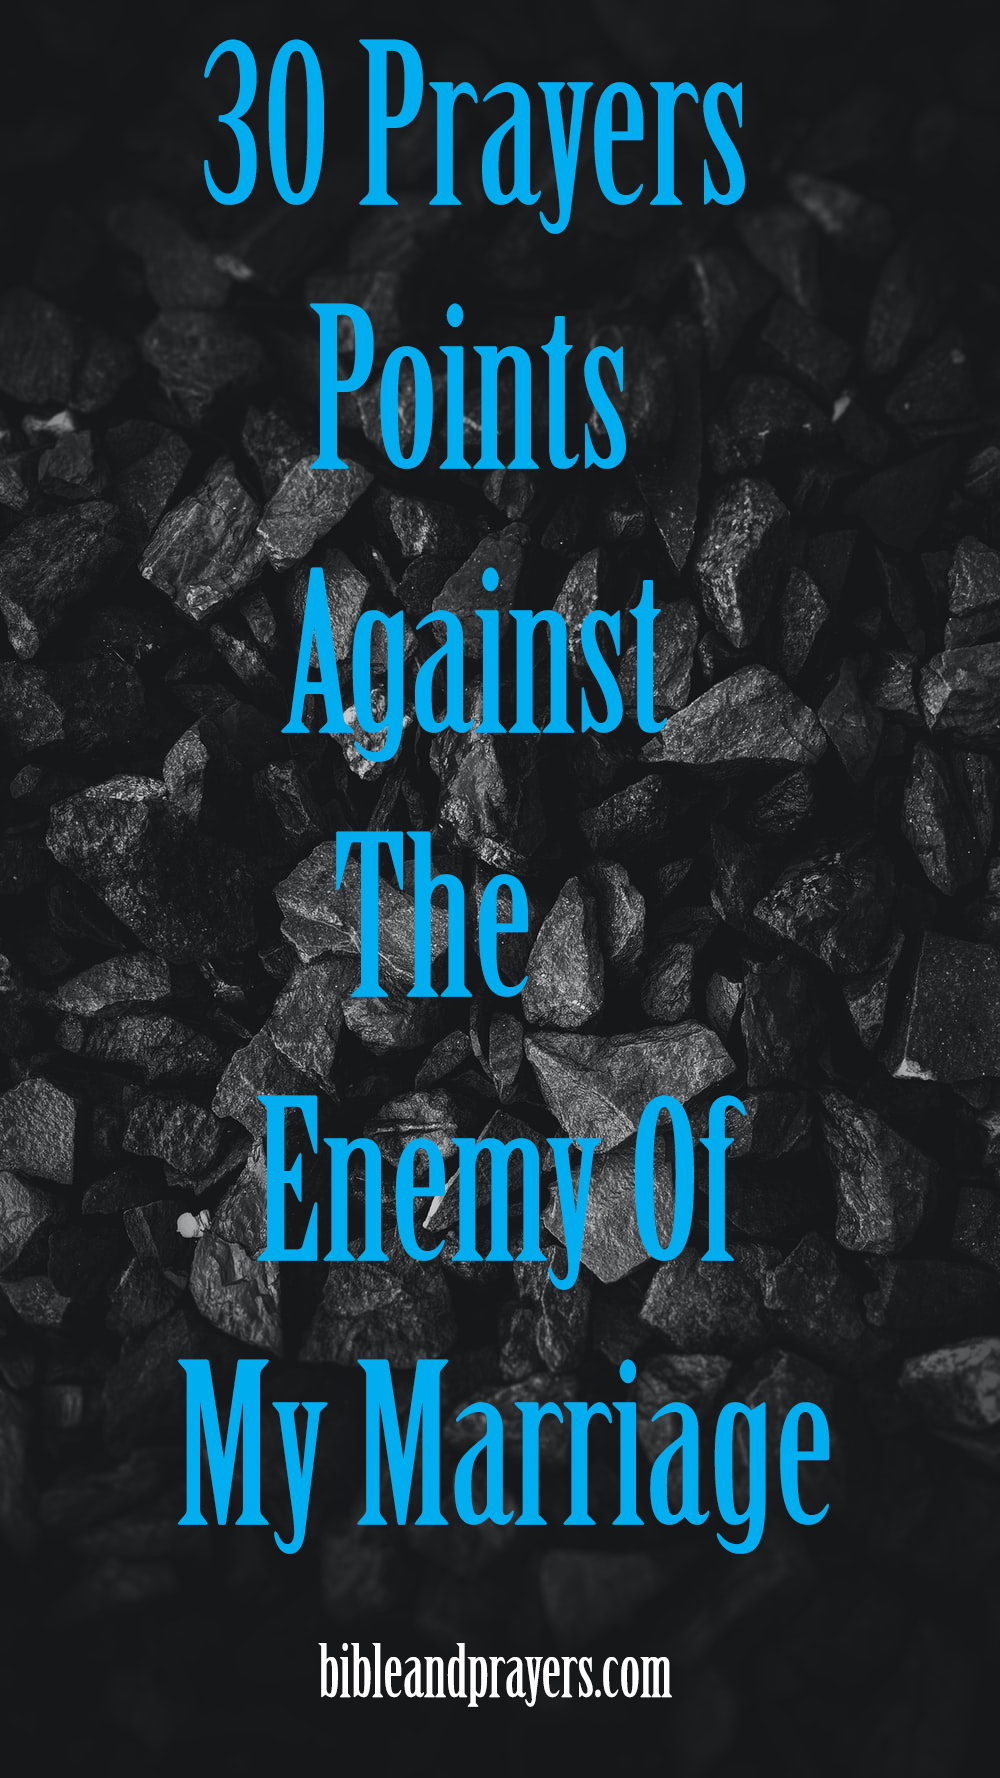 30 Prayers Points Against The Enemy Of My Marriage